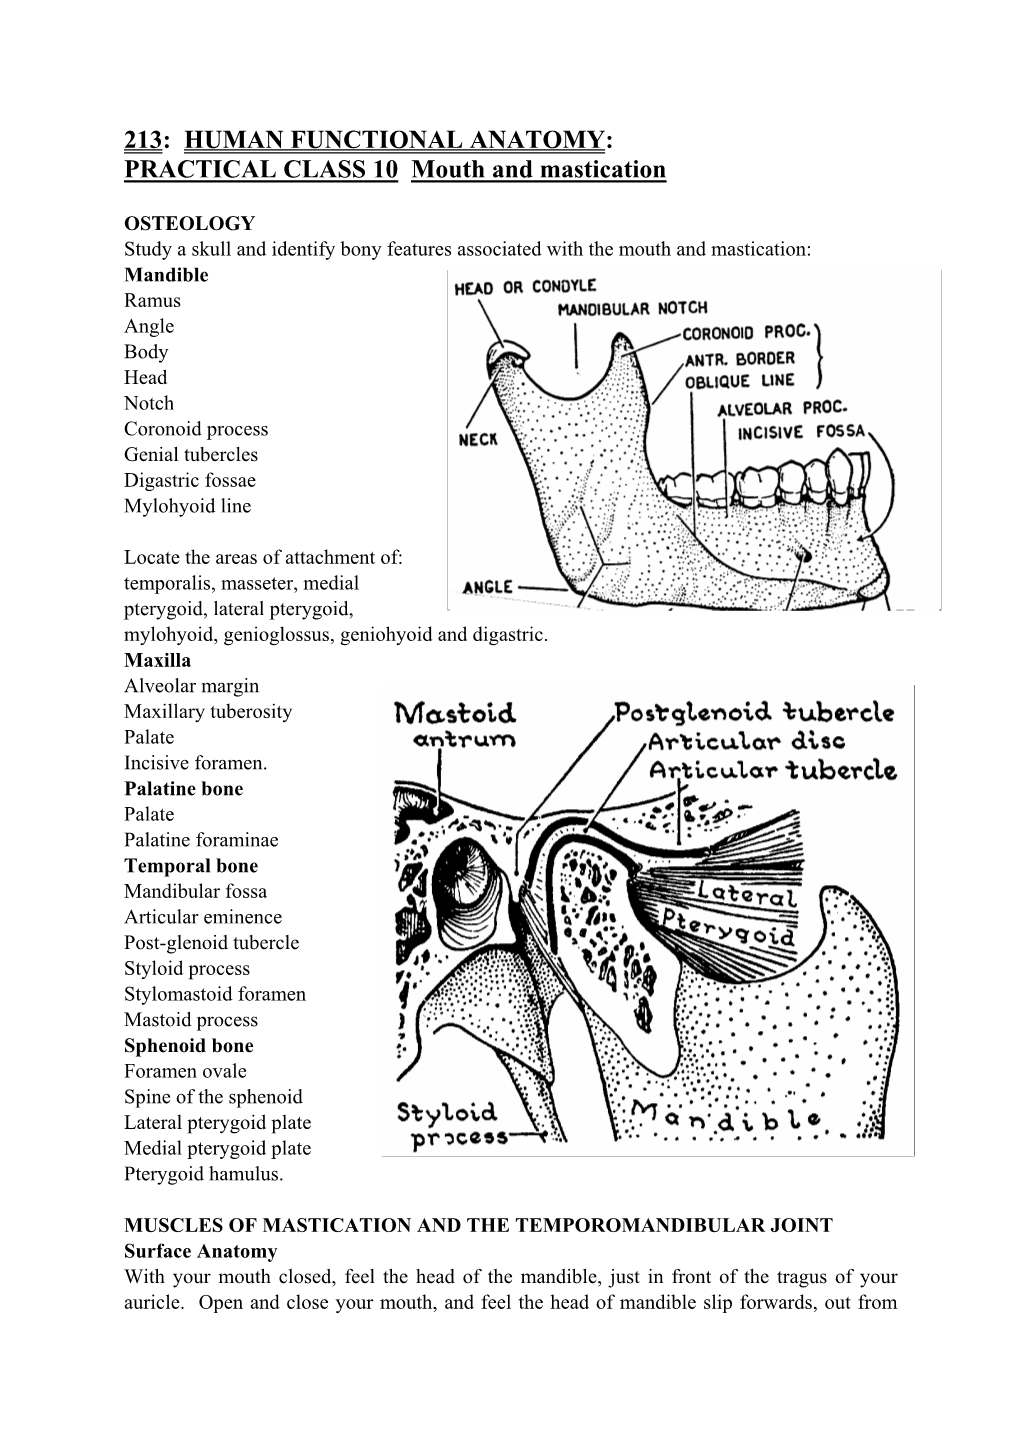 213: HUMAN FUNCTIONAL ANATOMY: PRACTICAL CLASS 10 Mouth and Mastication